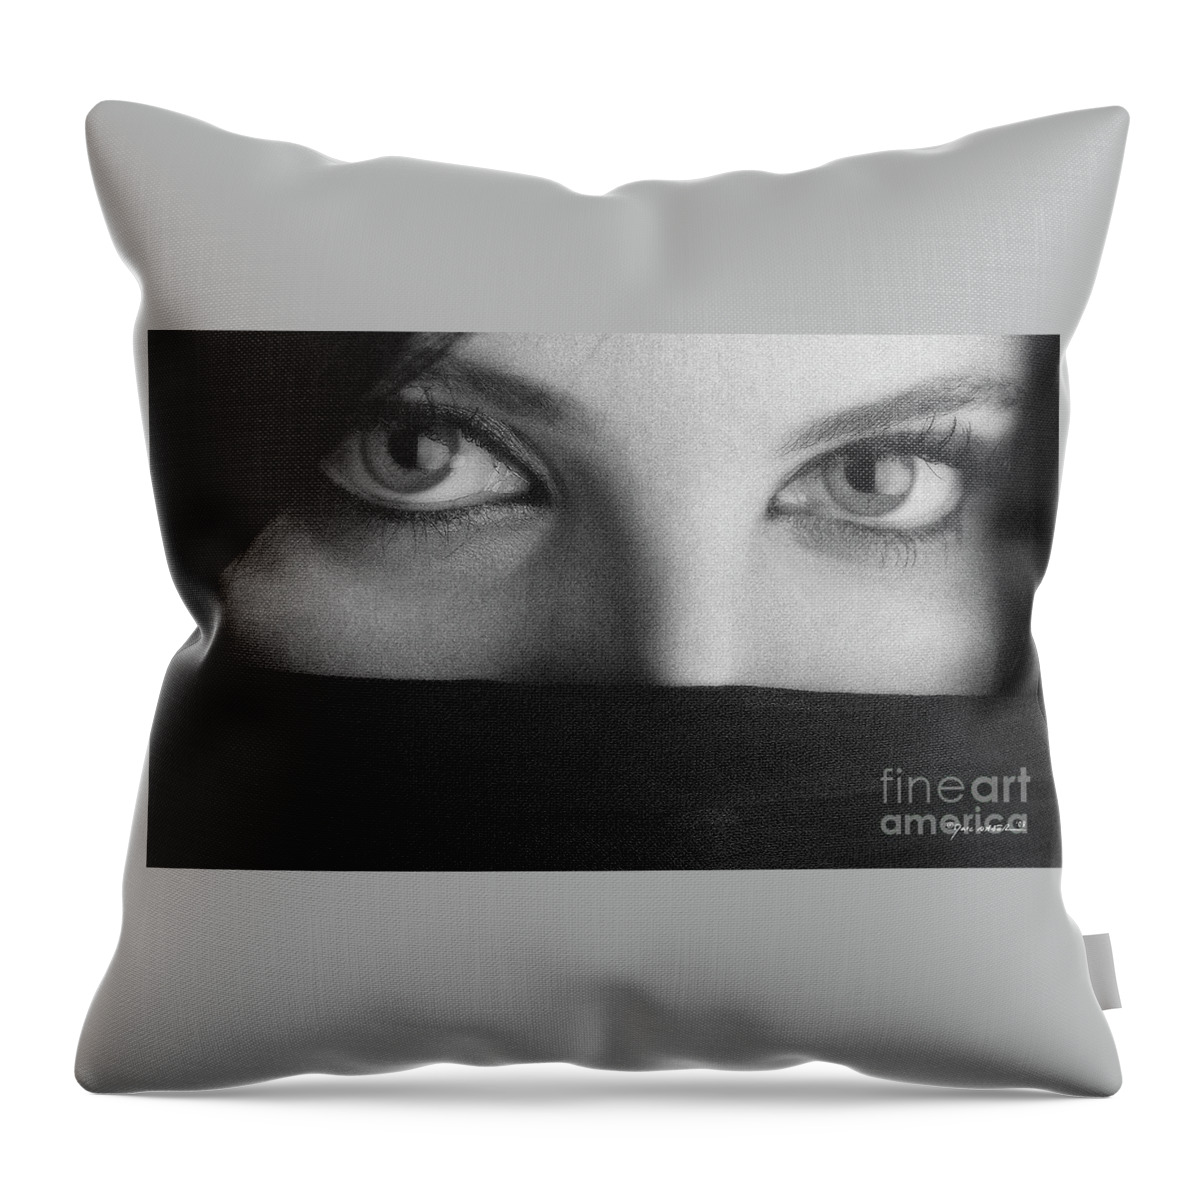 Marc Nader Photo Art Throw Pillow featuring the photograph Eyes Unveiled by Marc Nader